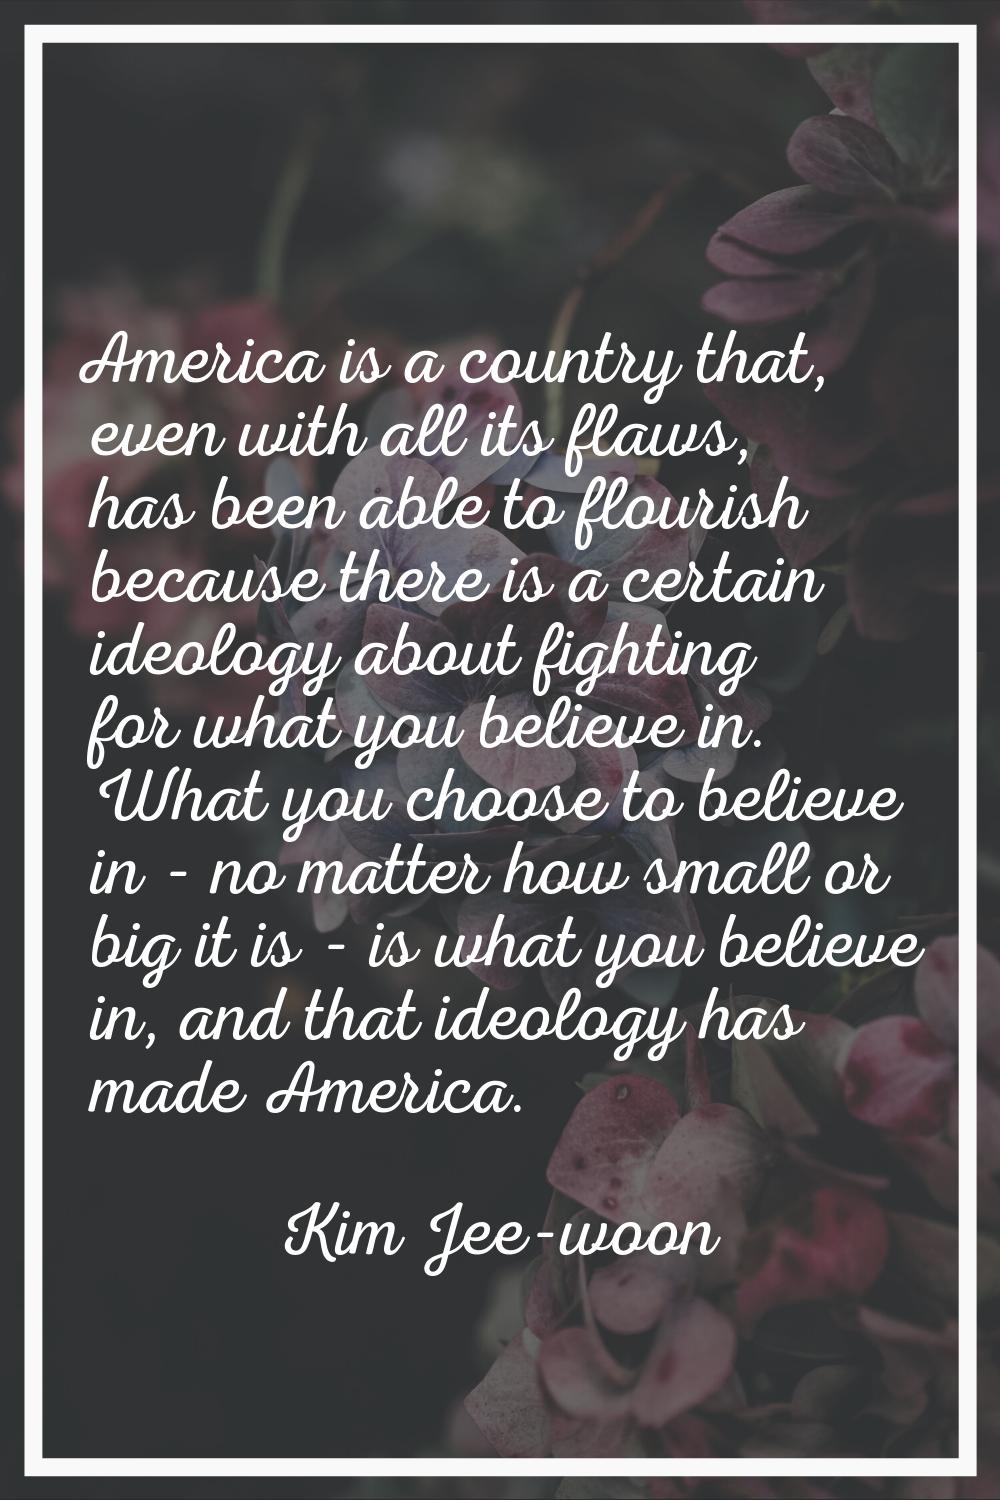 America is a country that, even with all its flaws, has been able to flourish because there is a ce